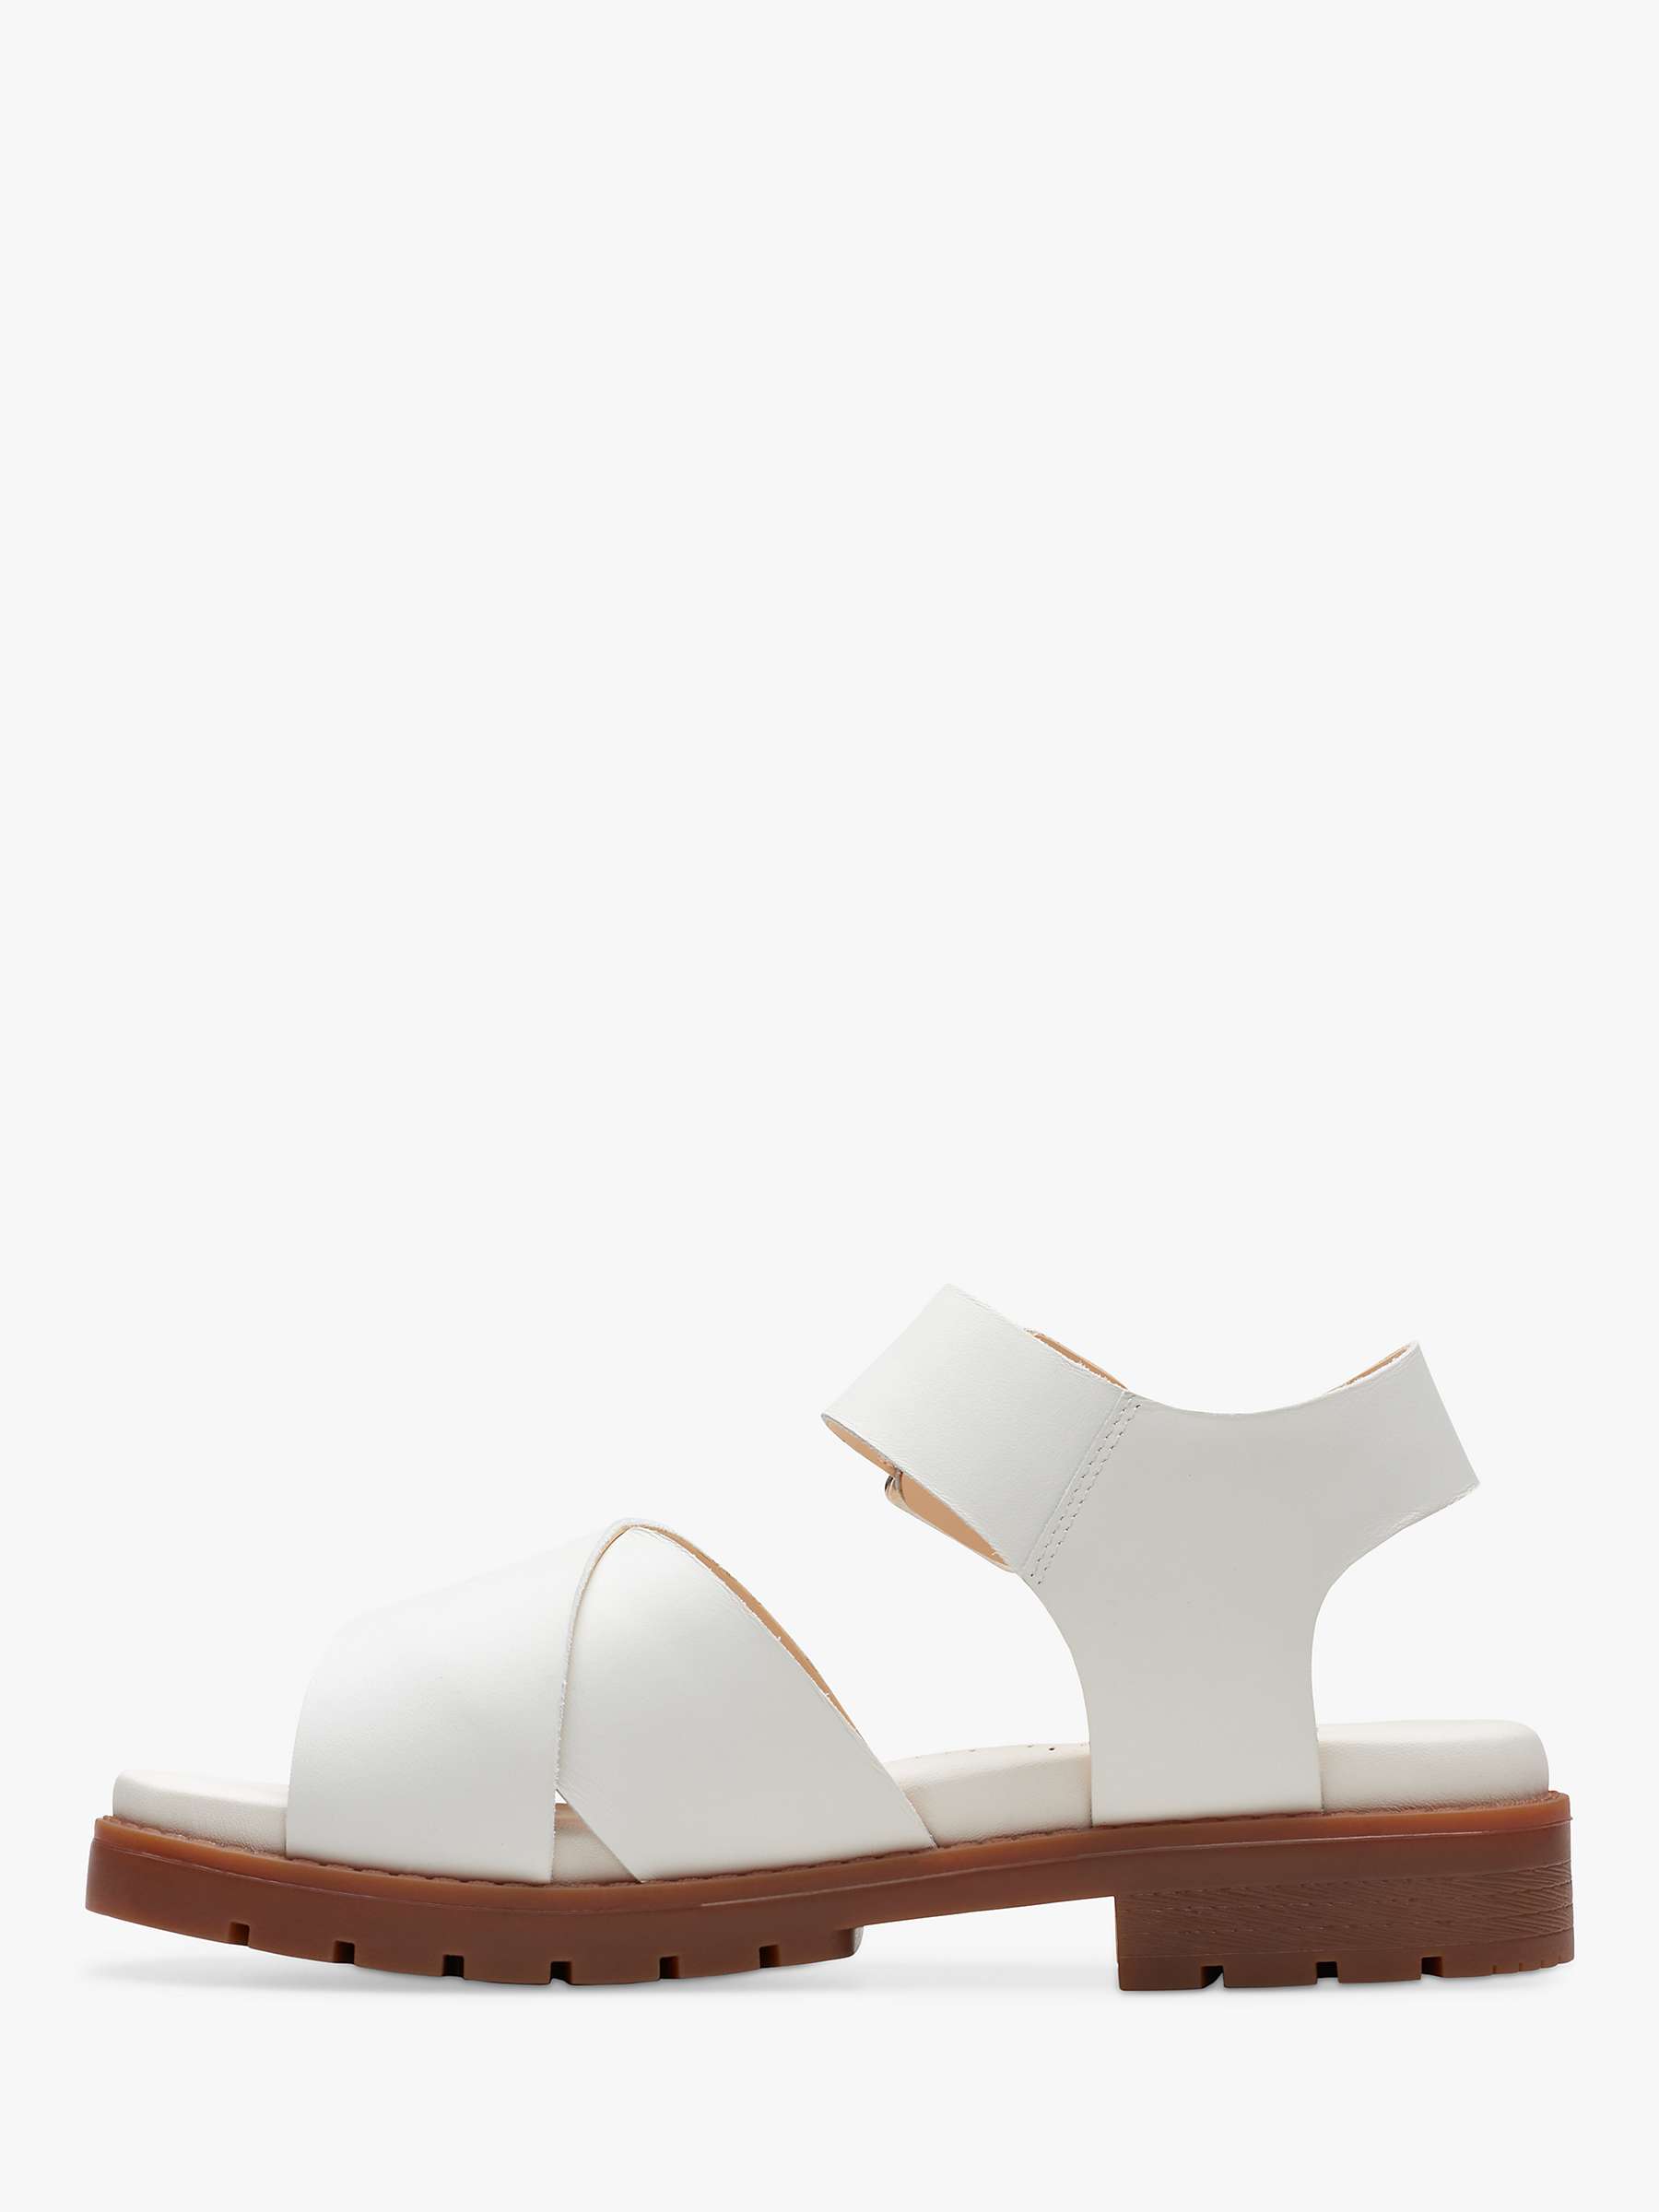 Buy Clarks Orinocco Leather Cross Strap Sandals, Off White Online at johnlewis.com